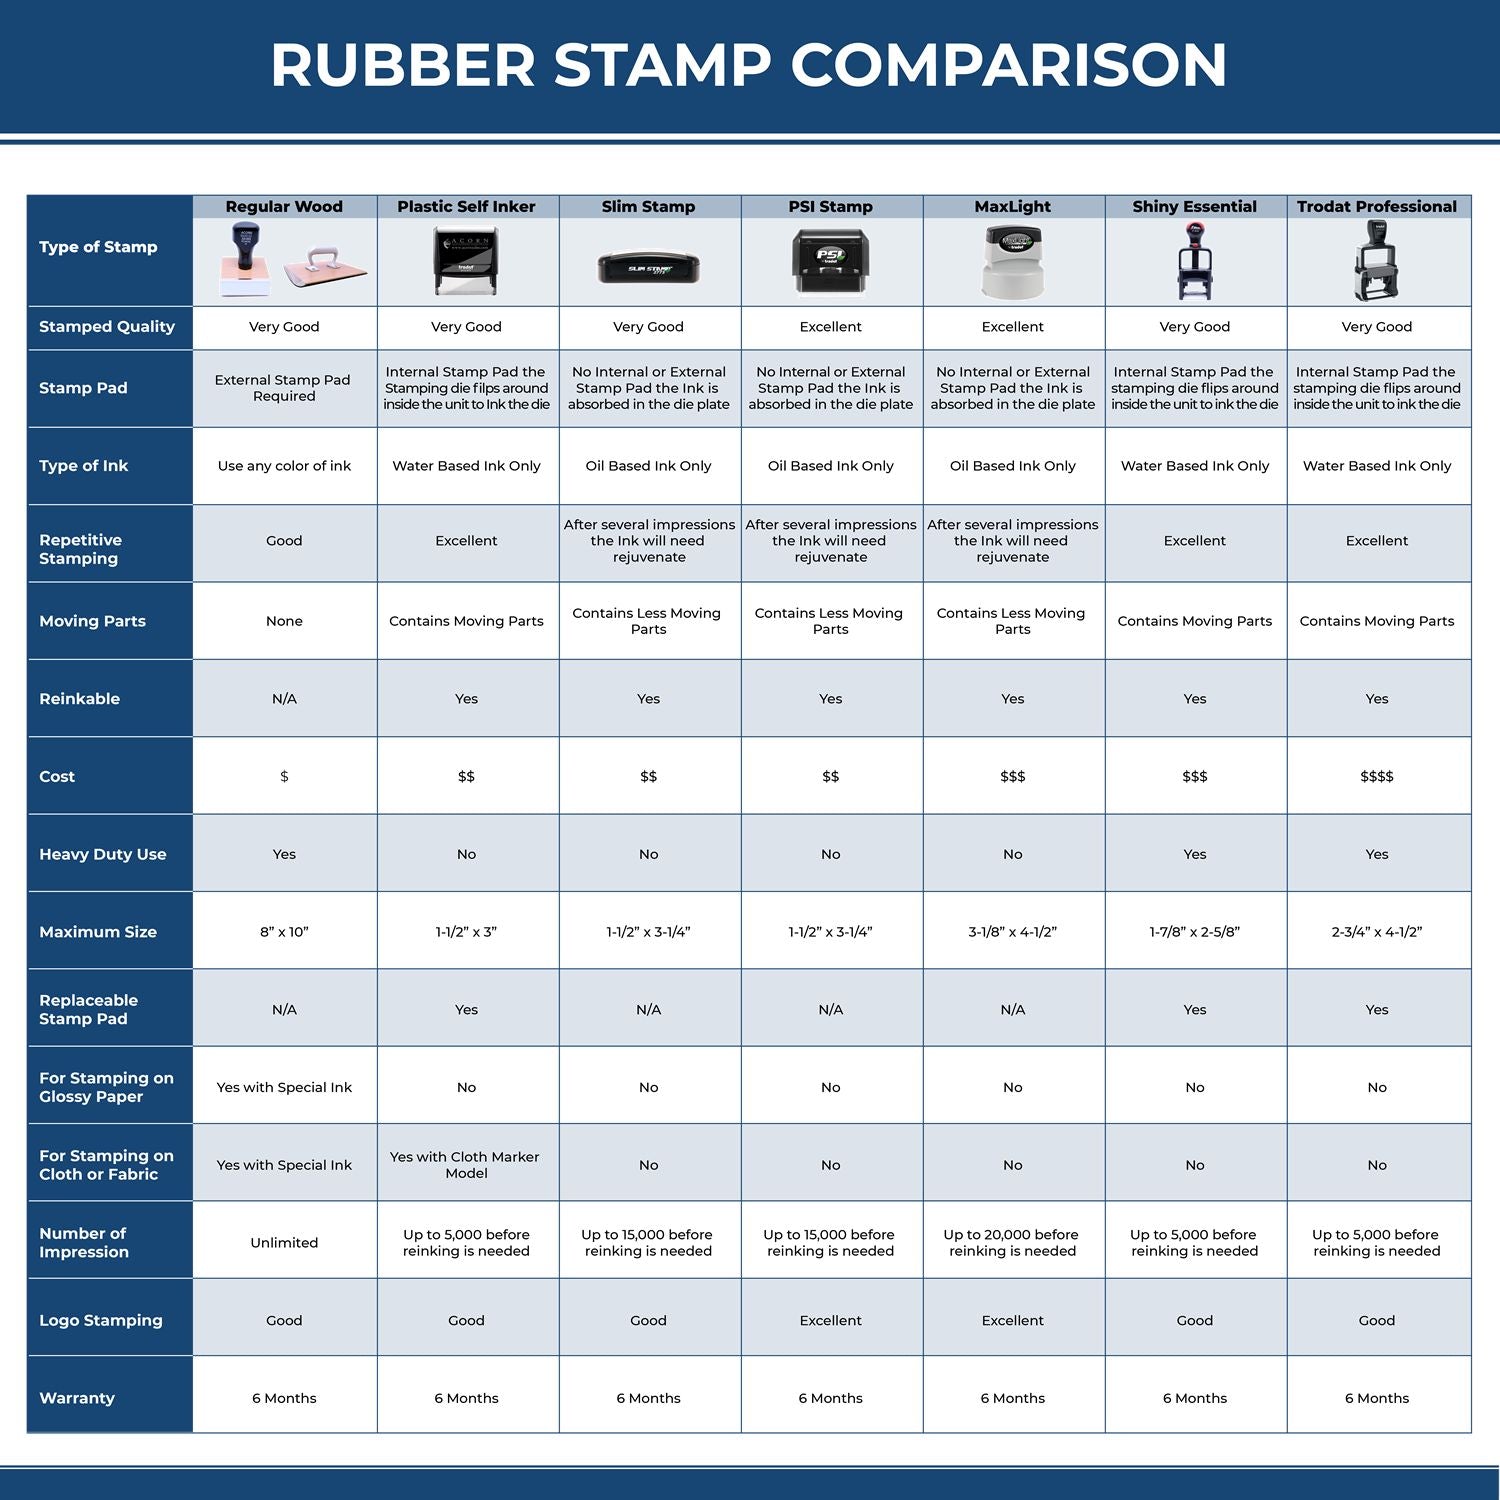 Round Double Star Rubber Stamp 5836R Rubber Stamp Comparison